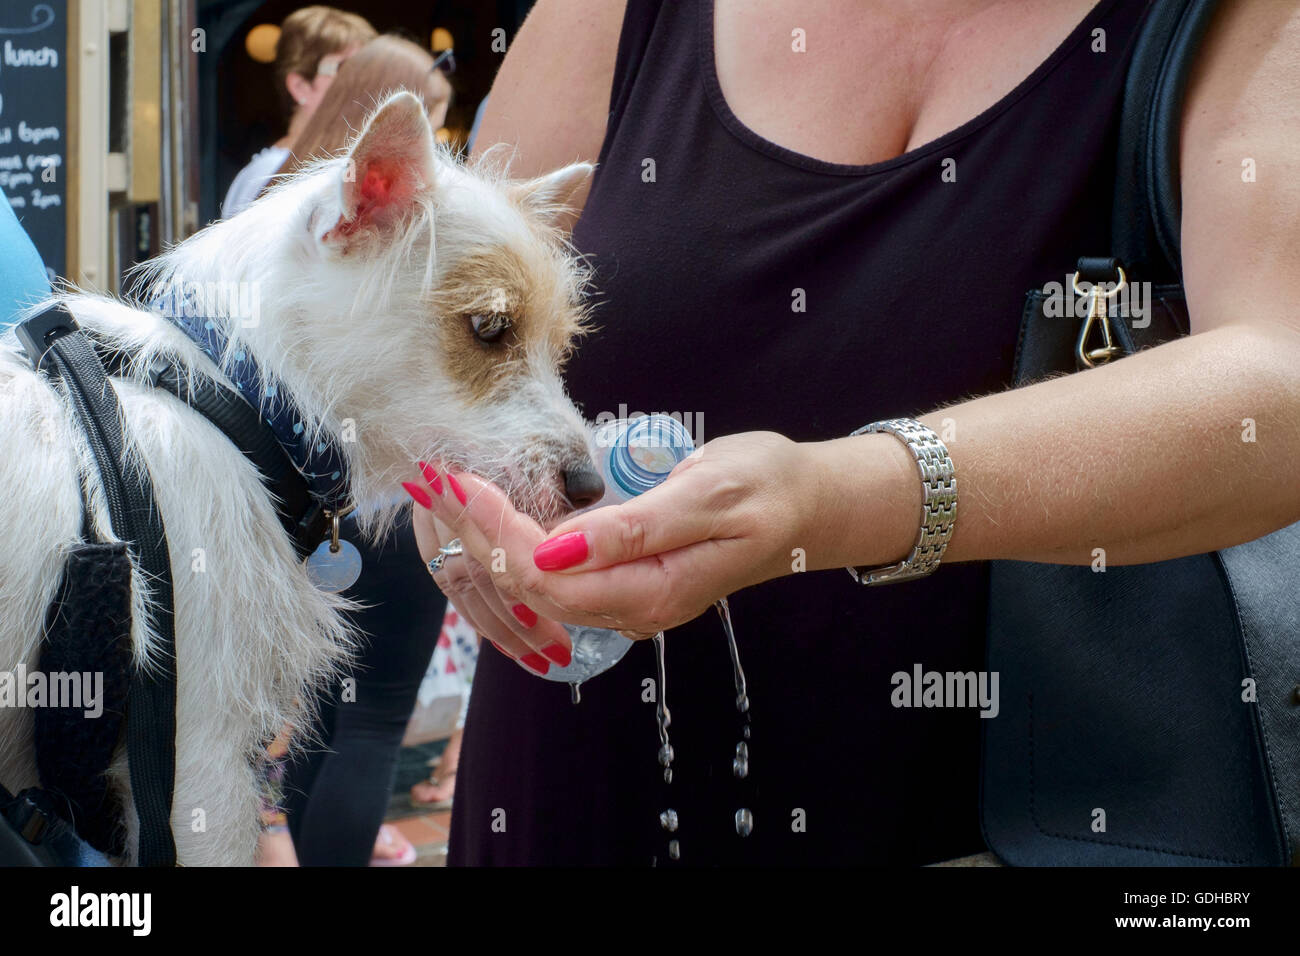 a thirsty small dog is given water from bottle by hand during hot sunny weather england uk Stock Photo